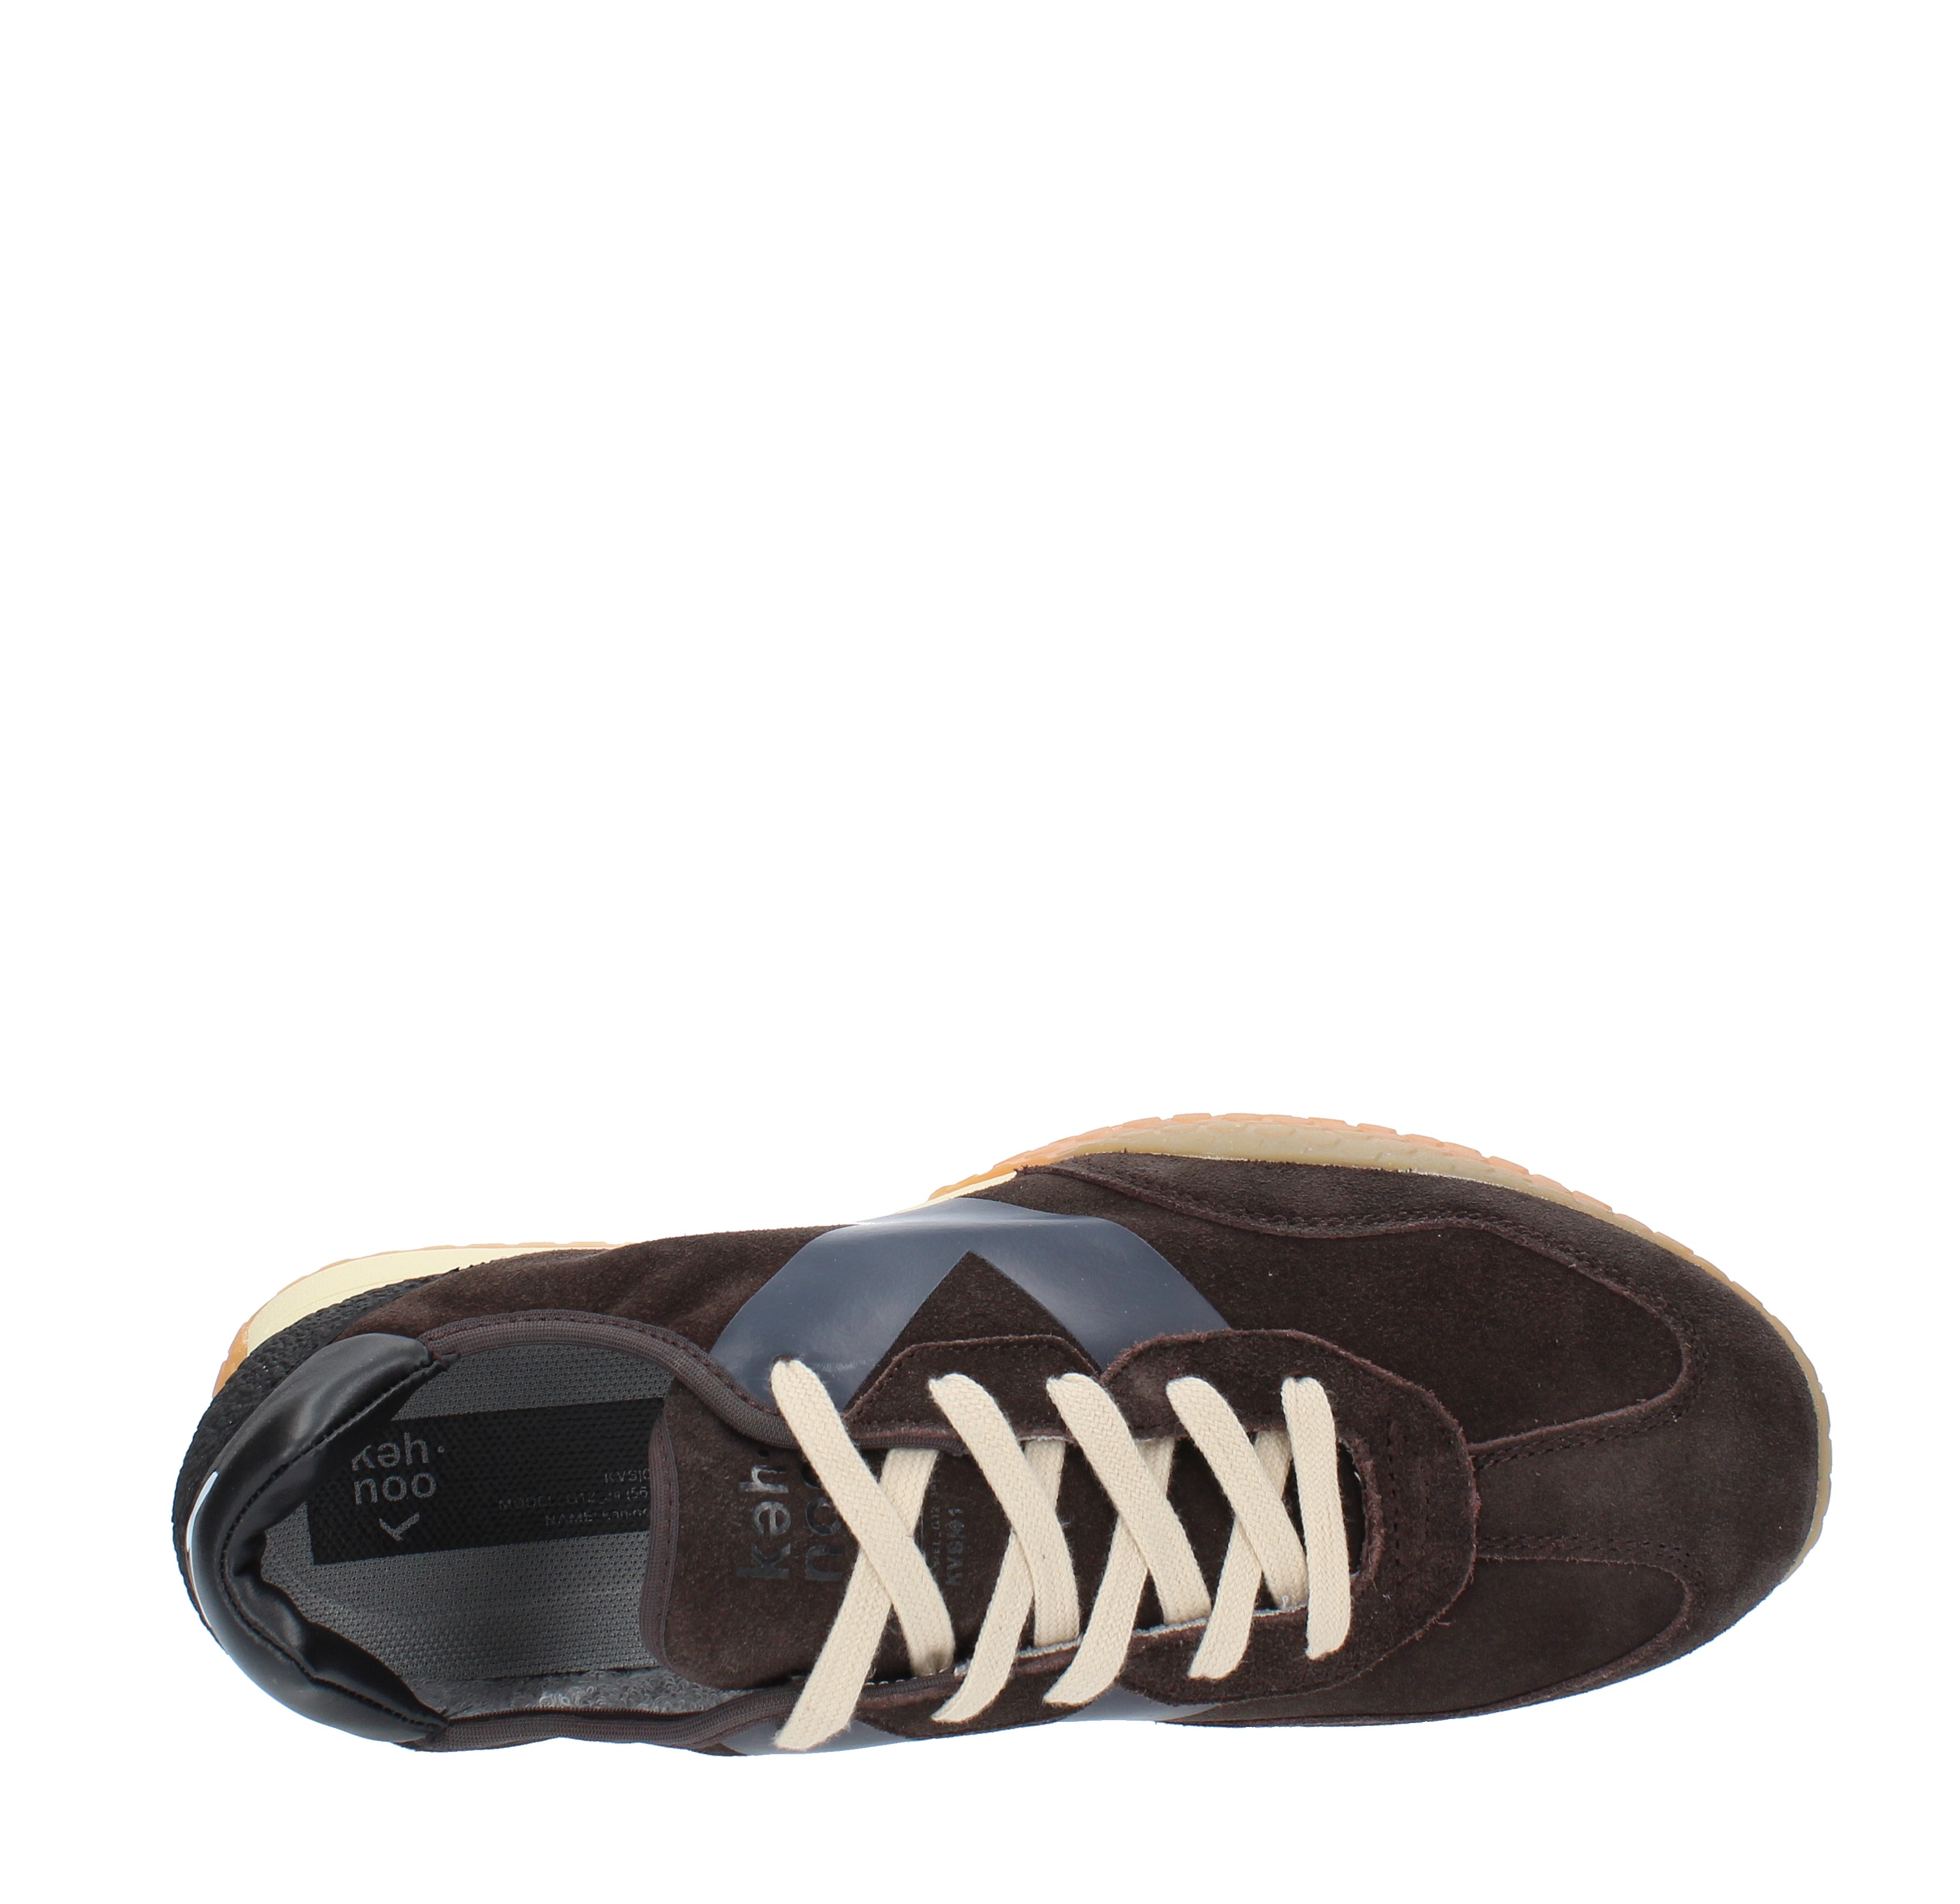 KEH NOO trainers in fabric suede and rubber KEH NOO | S00KM9517COFFEE